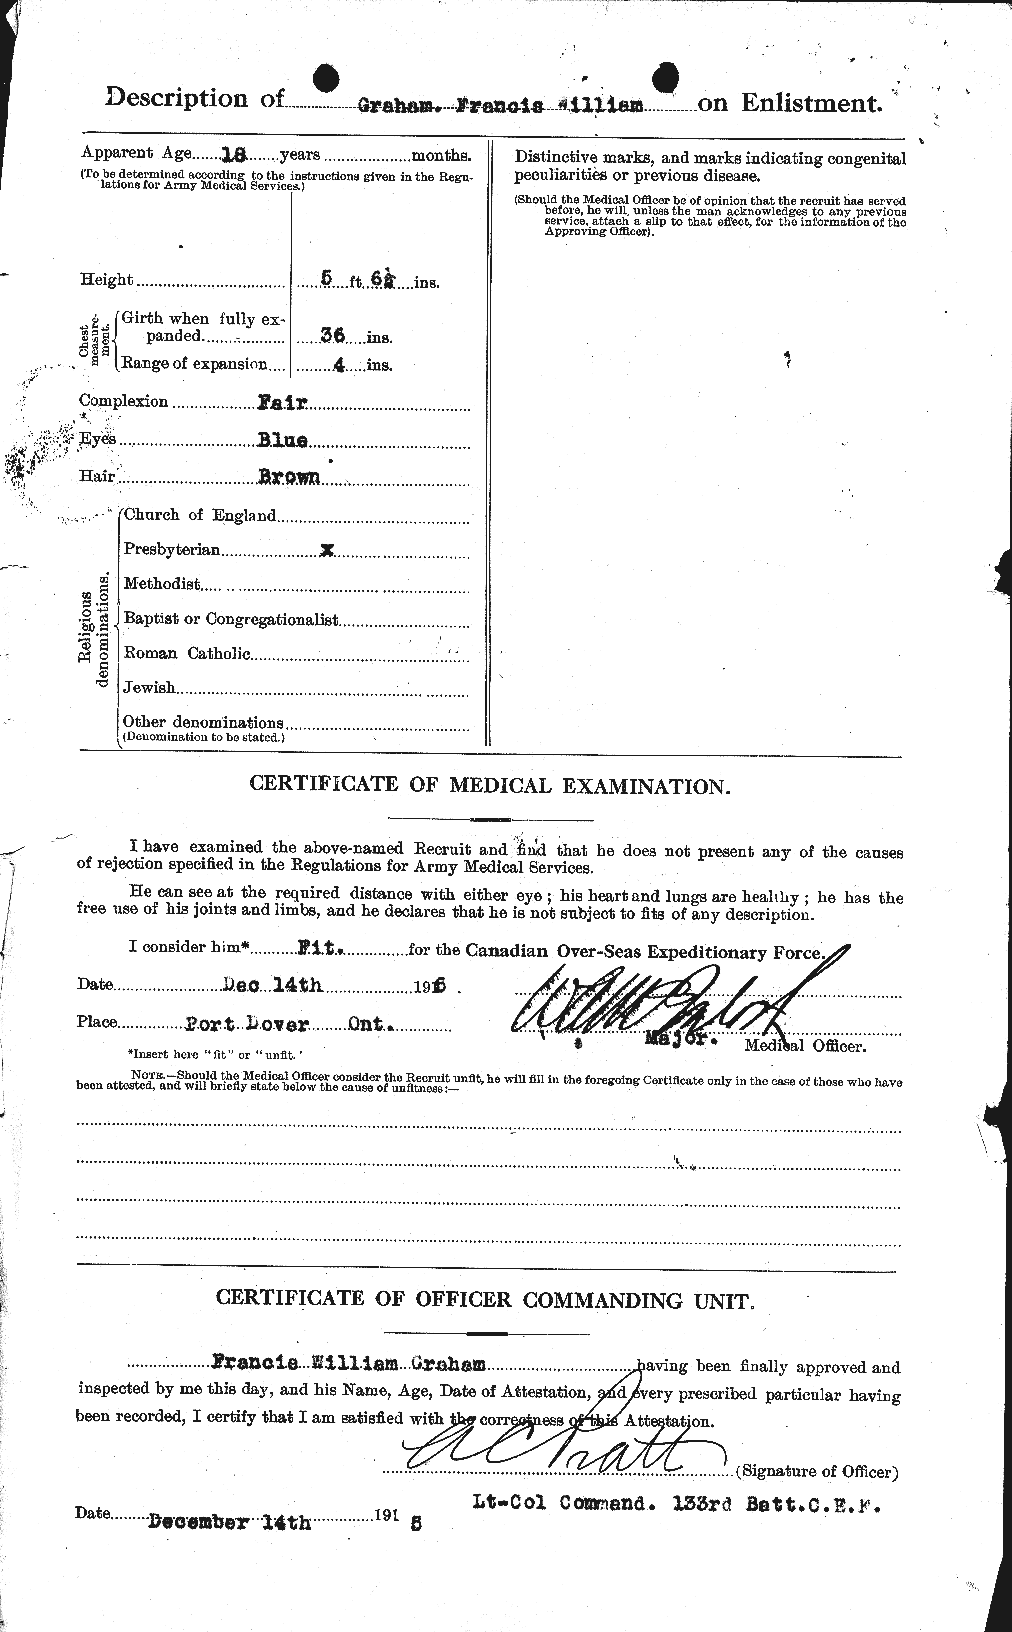 Personnel Records of the First World War - CEF 357581b